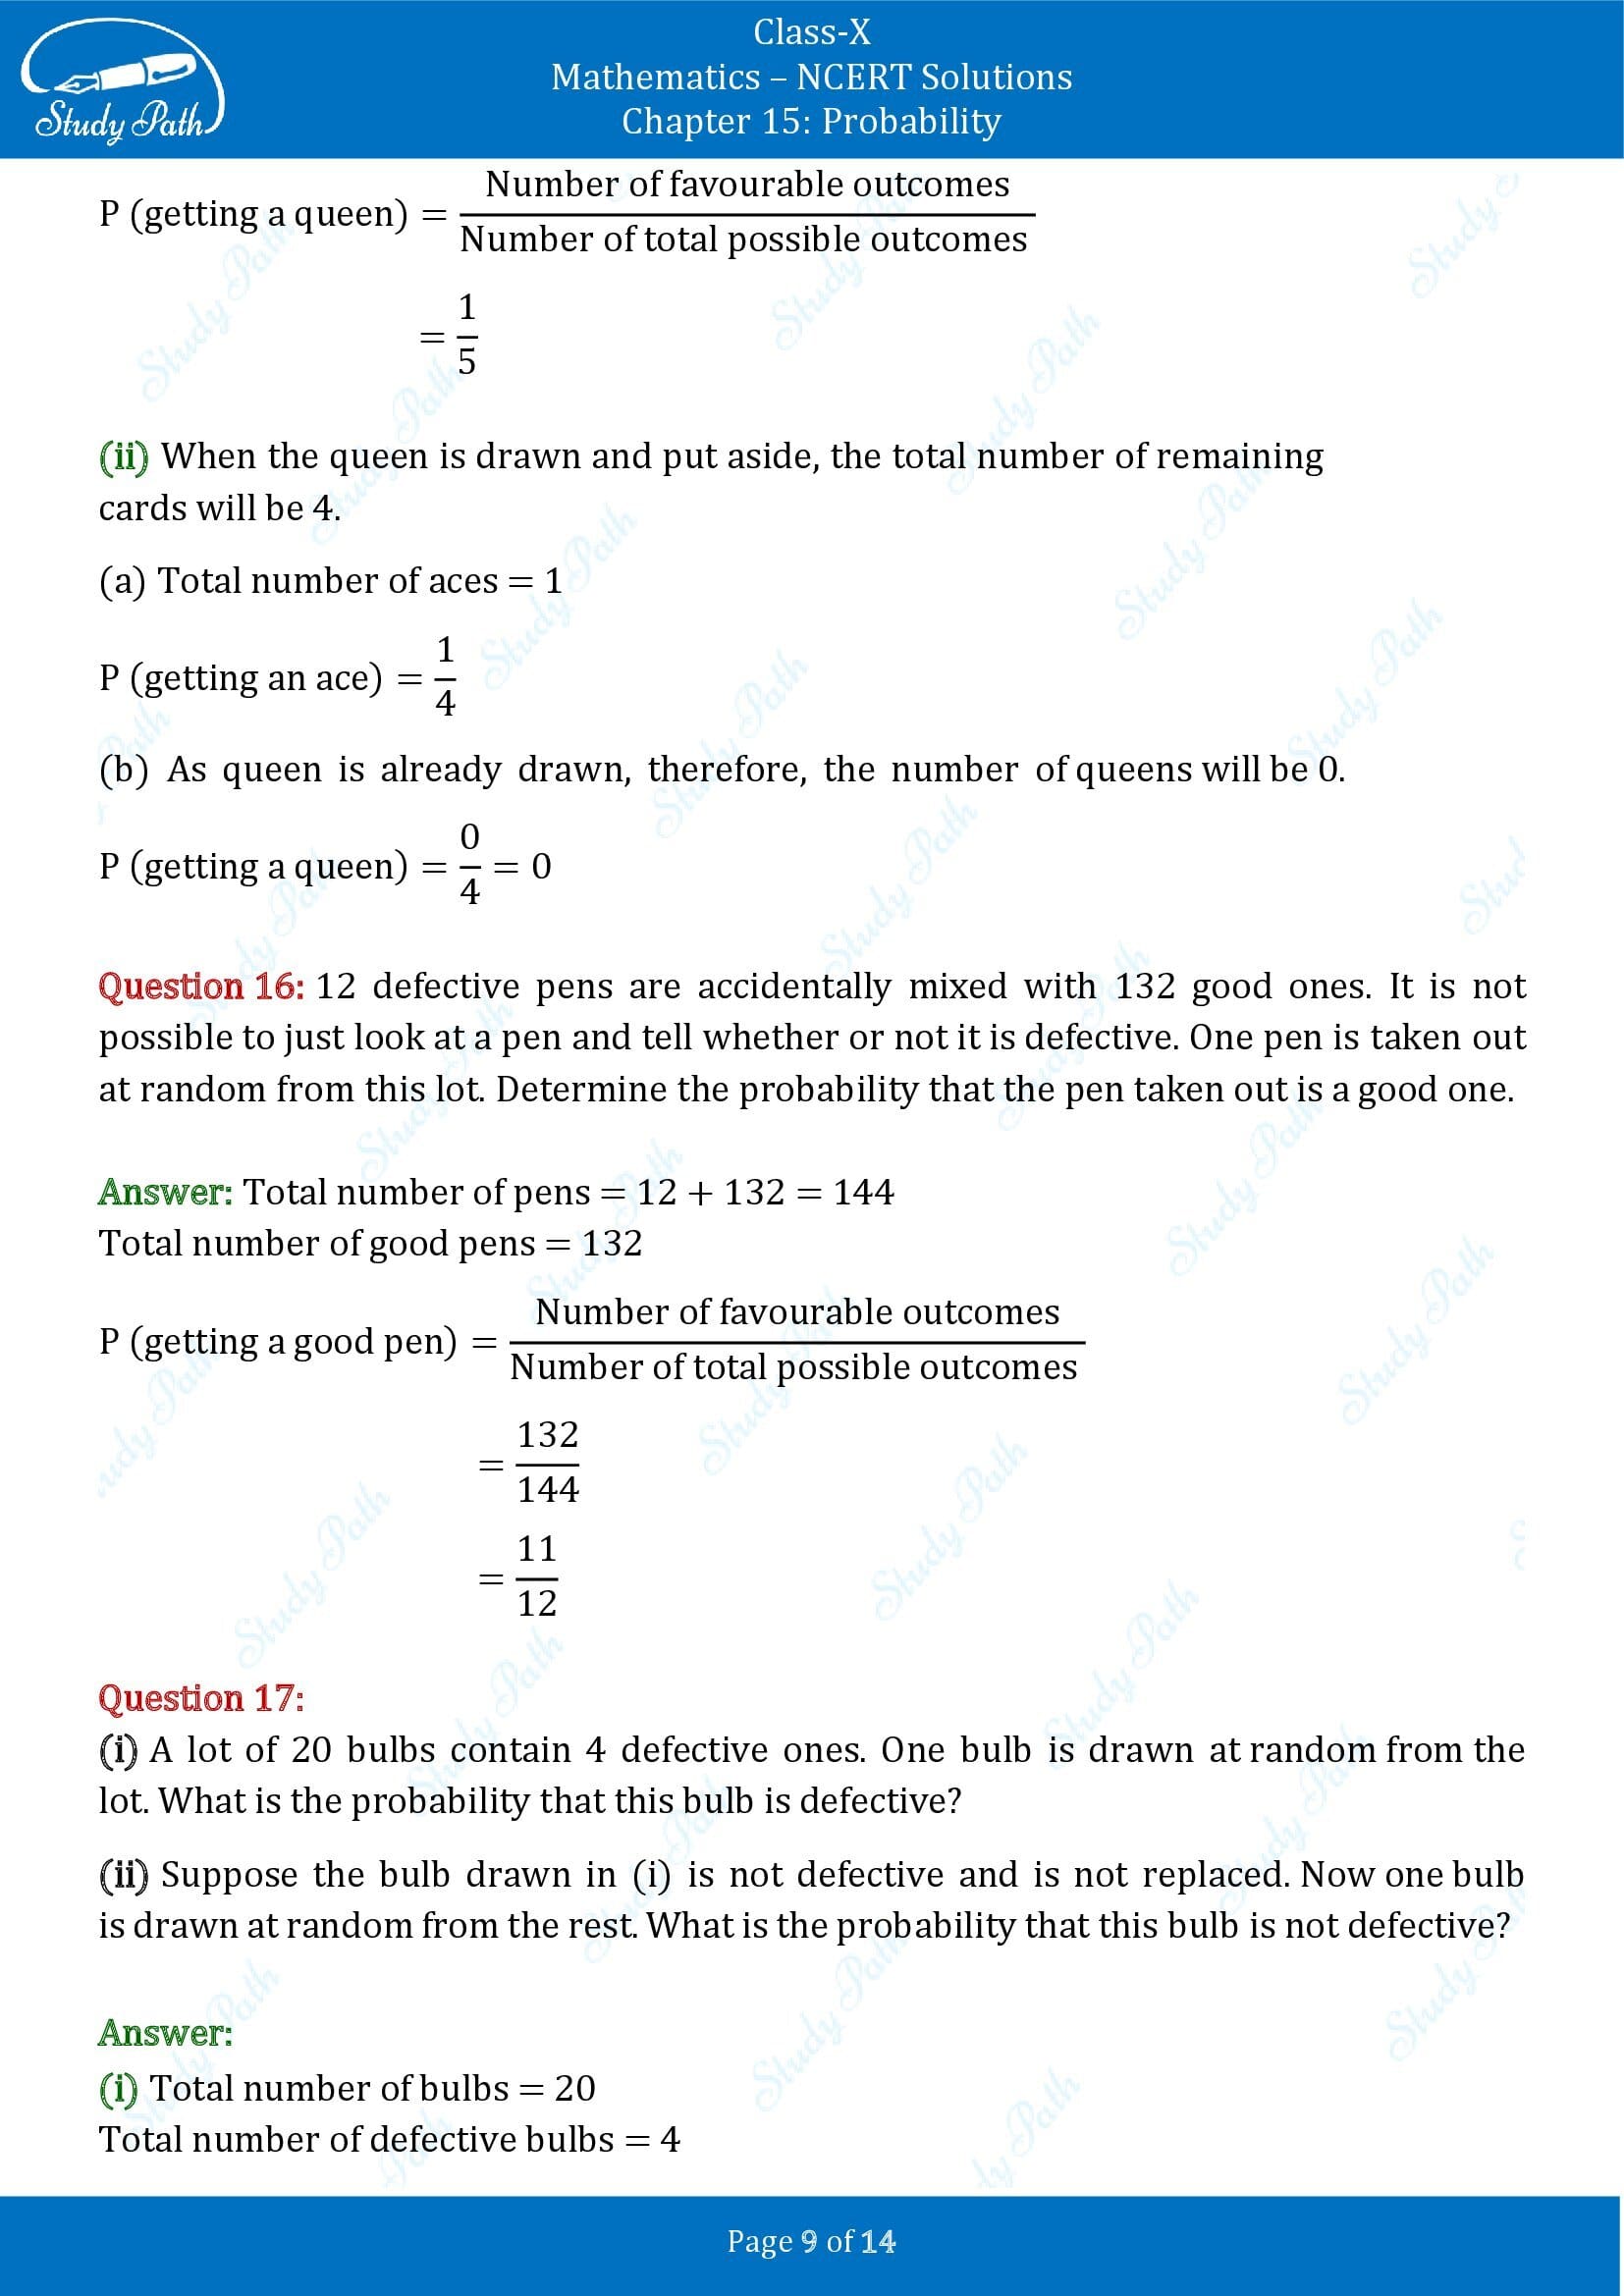 NCERT Solutions for Class 10 Maths Chapter 15 Probability Exercise 15.1 00009